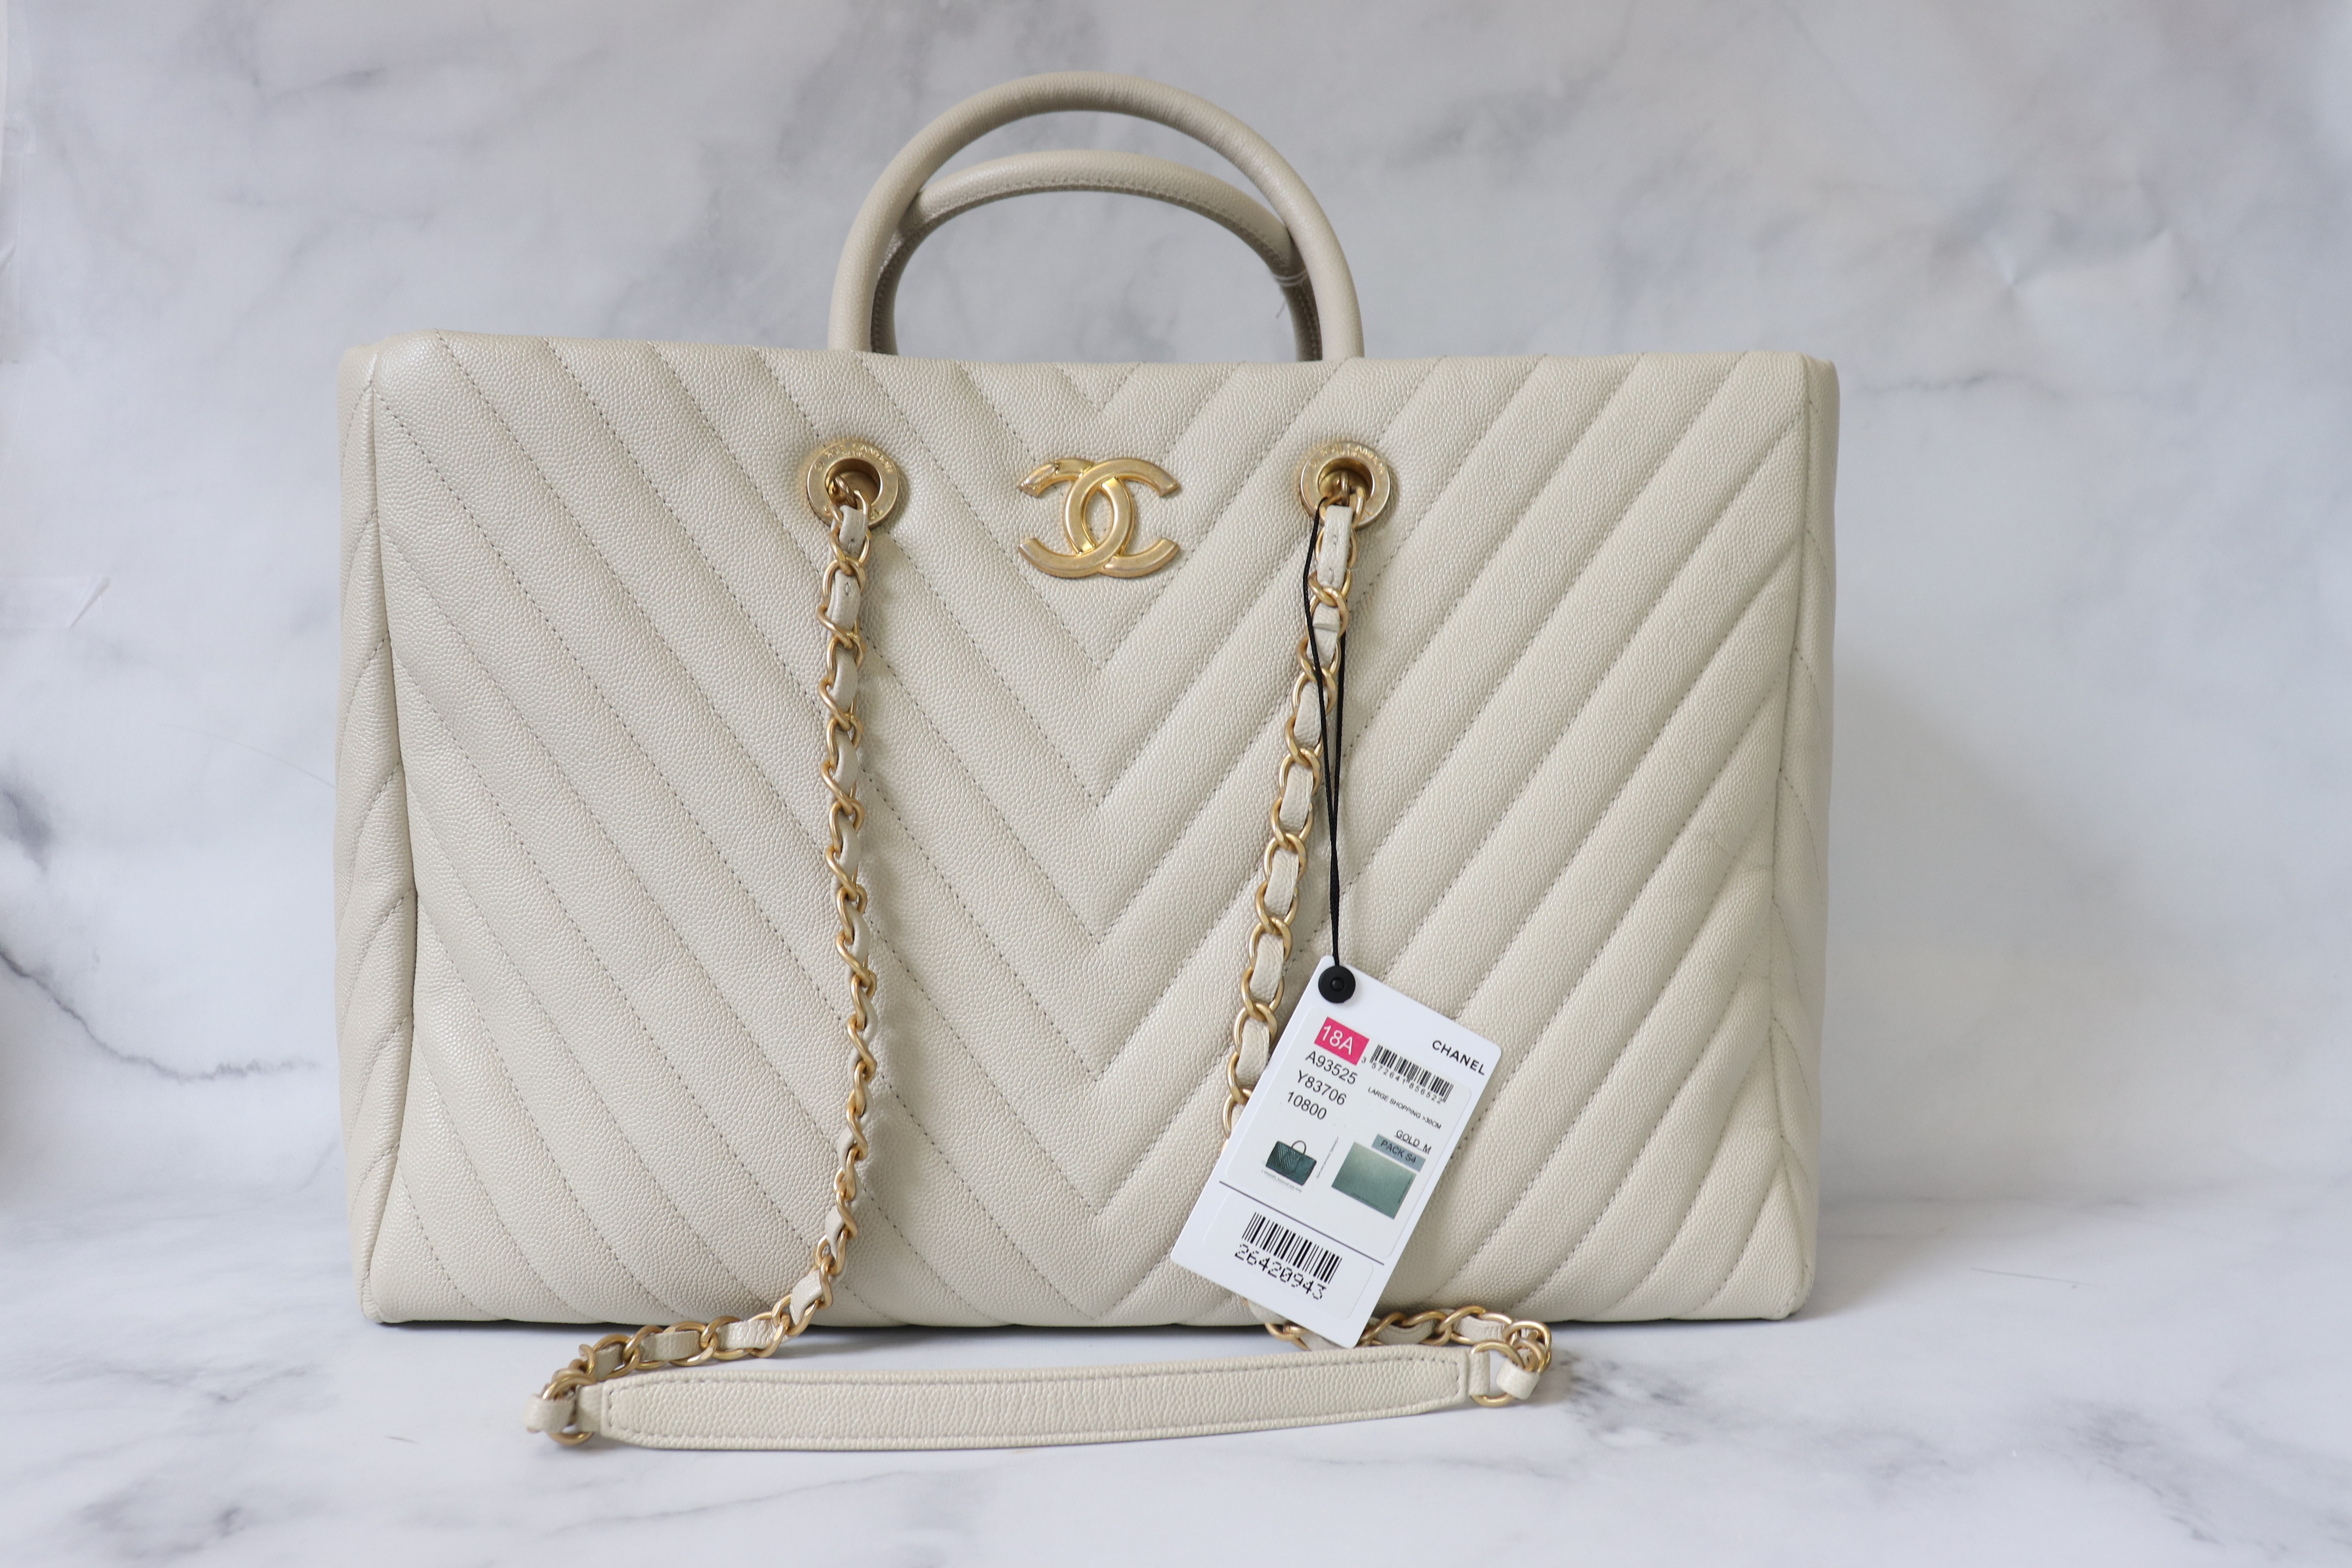 Chanel Large Coco Handle Tote Bag, 18A Ivory Caviar leather, Brushed Gold  Hardware, Preowned in Dustbag (Mint Condition) - Julia Rose Boston